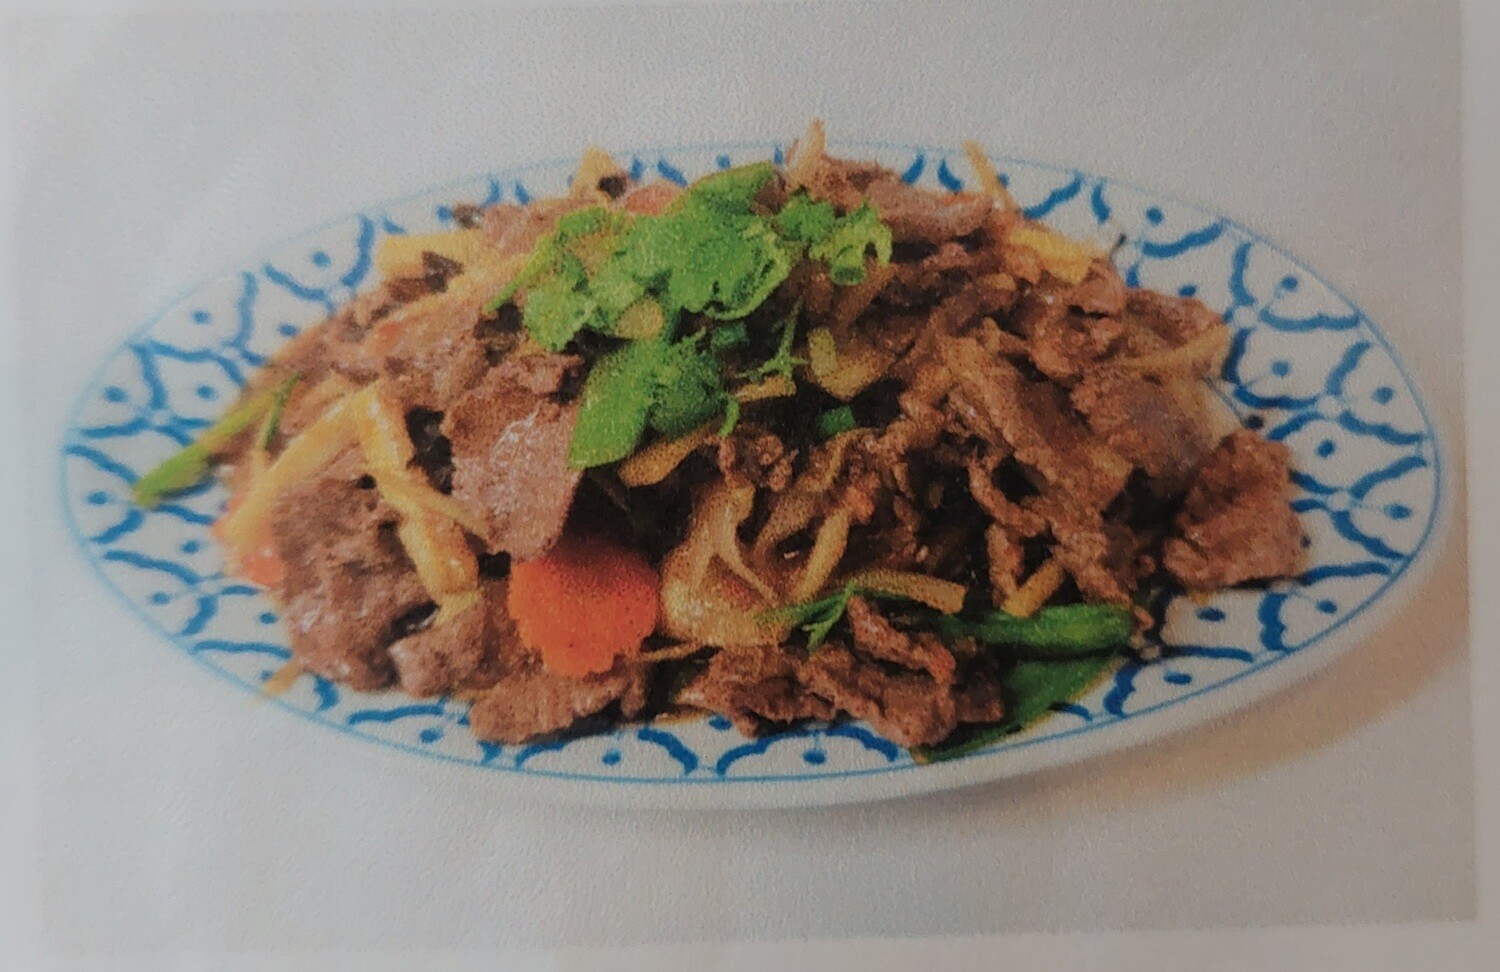 30. Boeuf sauté au gingembre / Fried beef with ginger